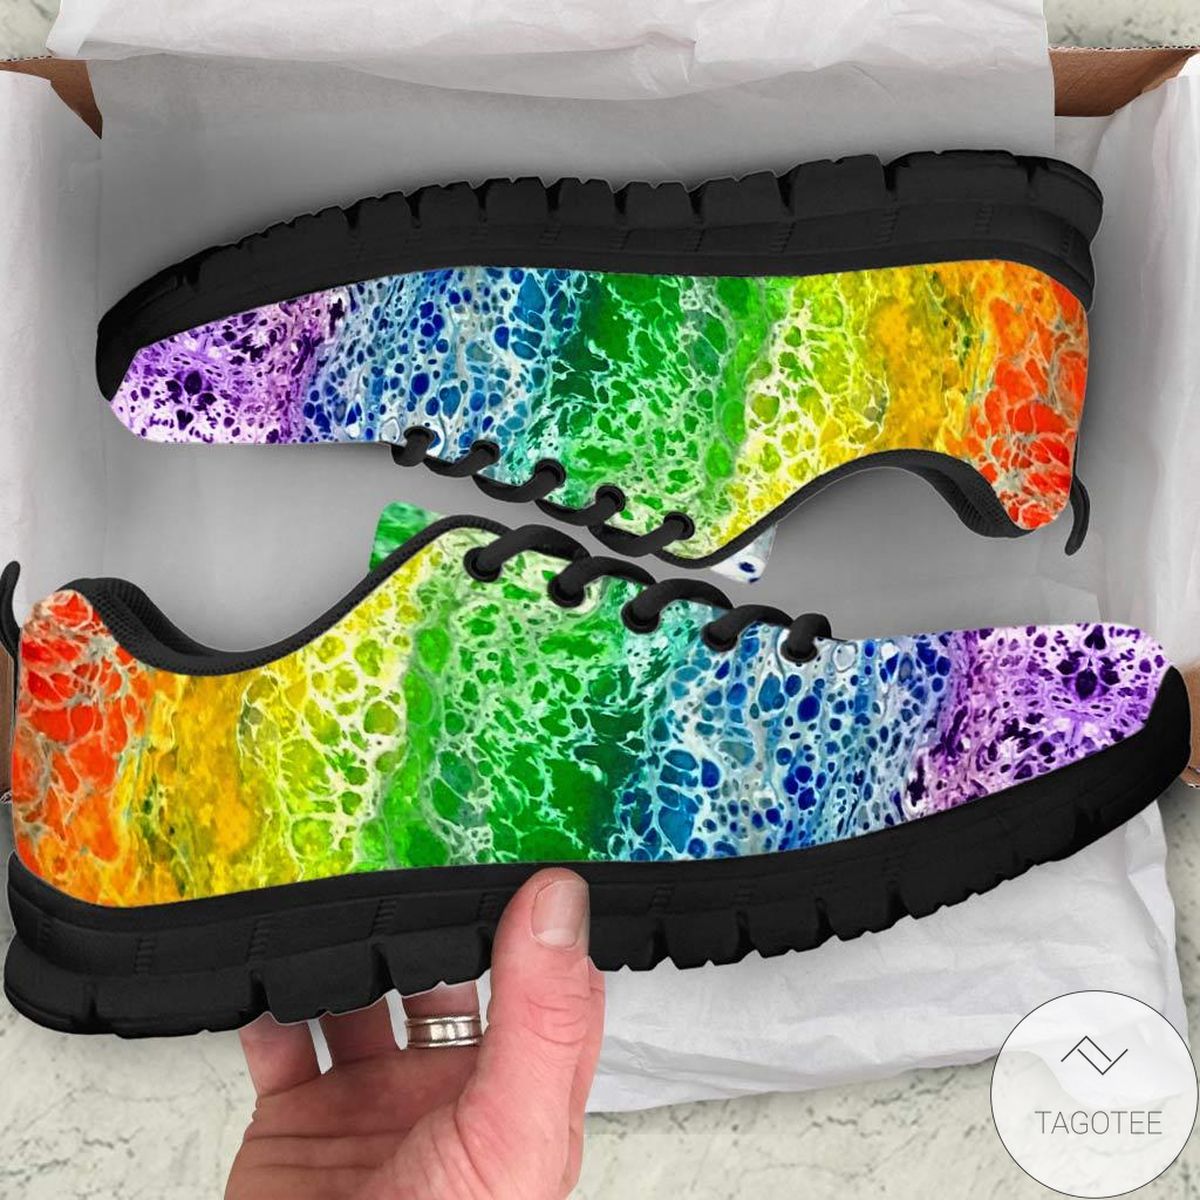 Colorful Art Of Love Lgbt Support Sneakers